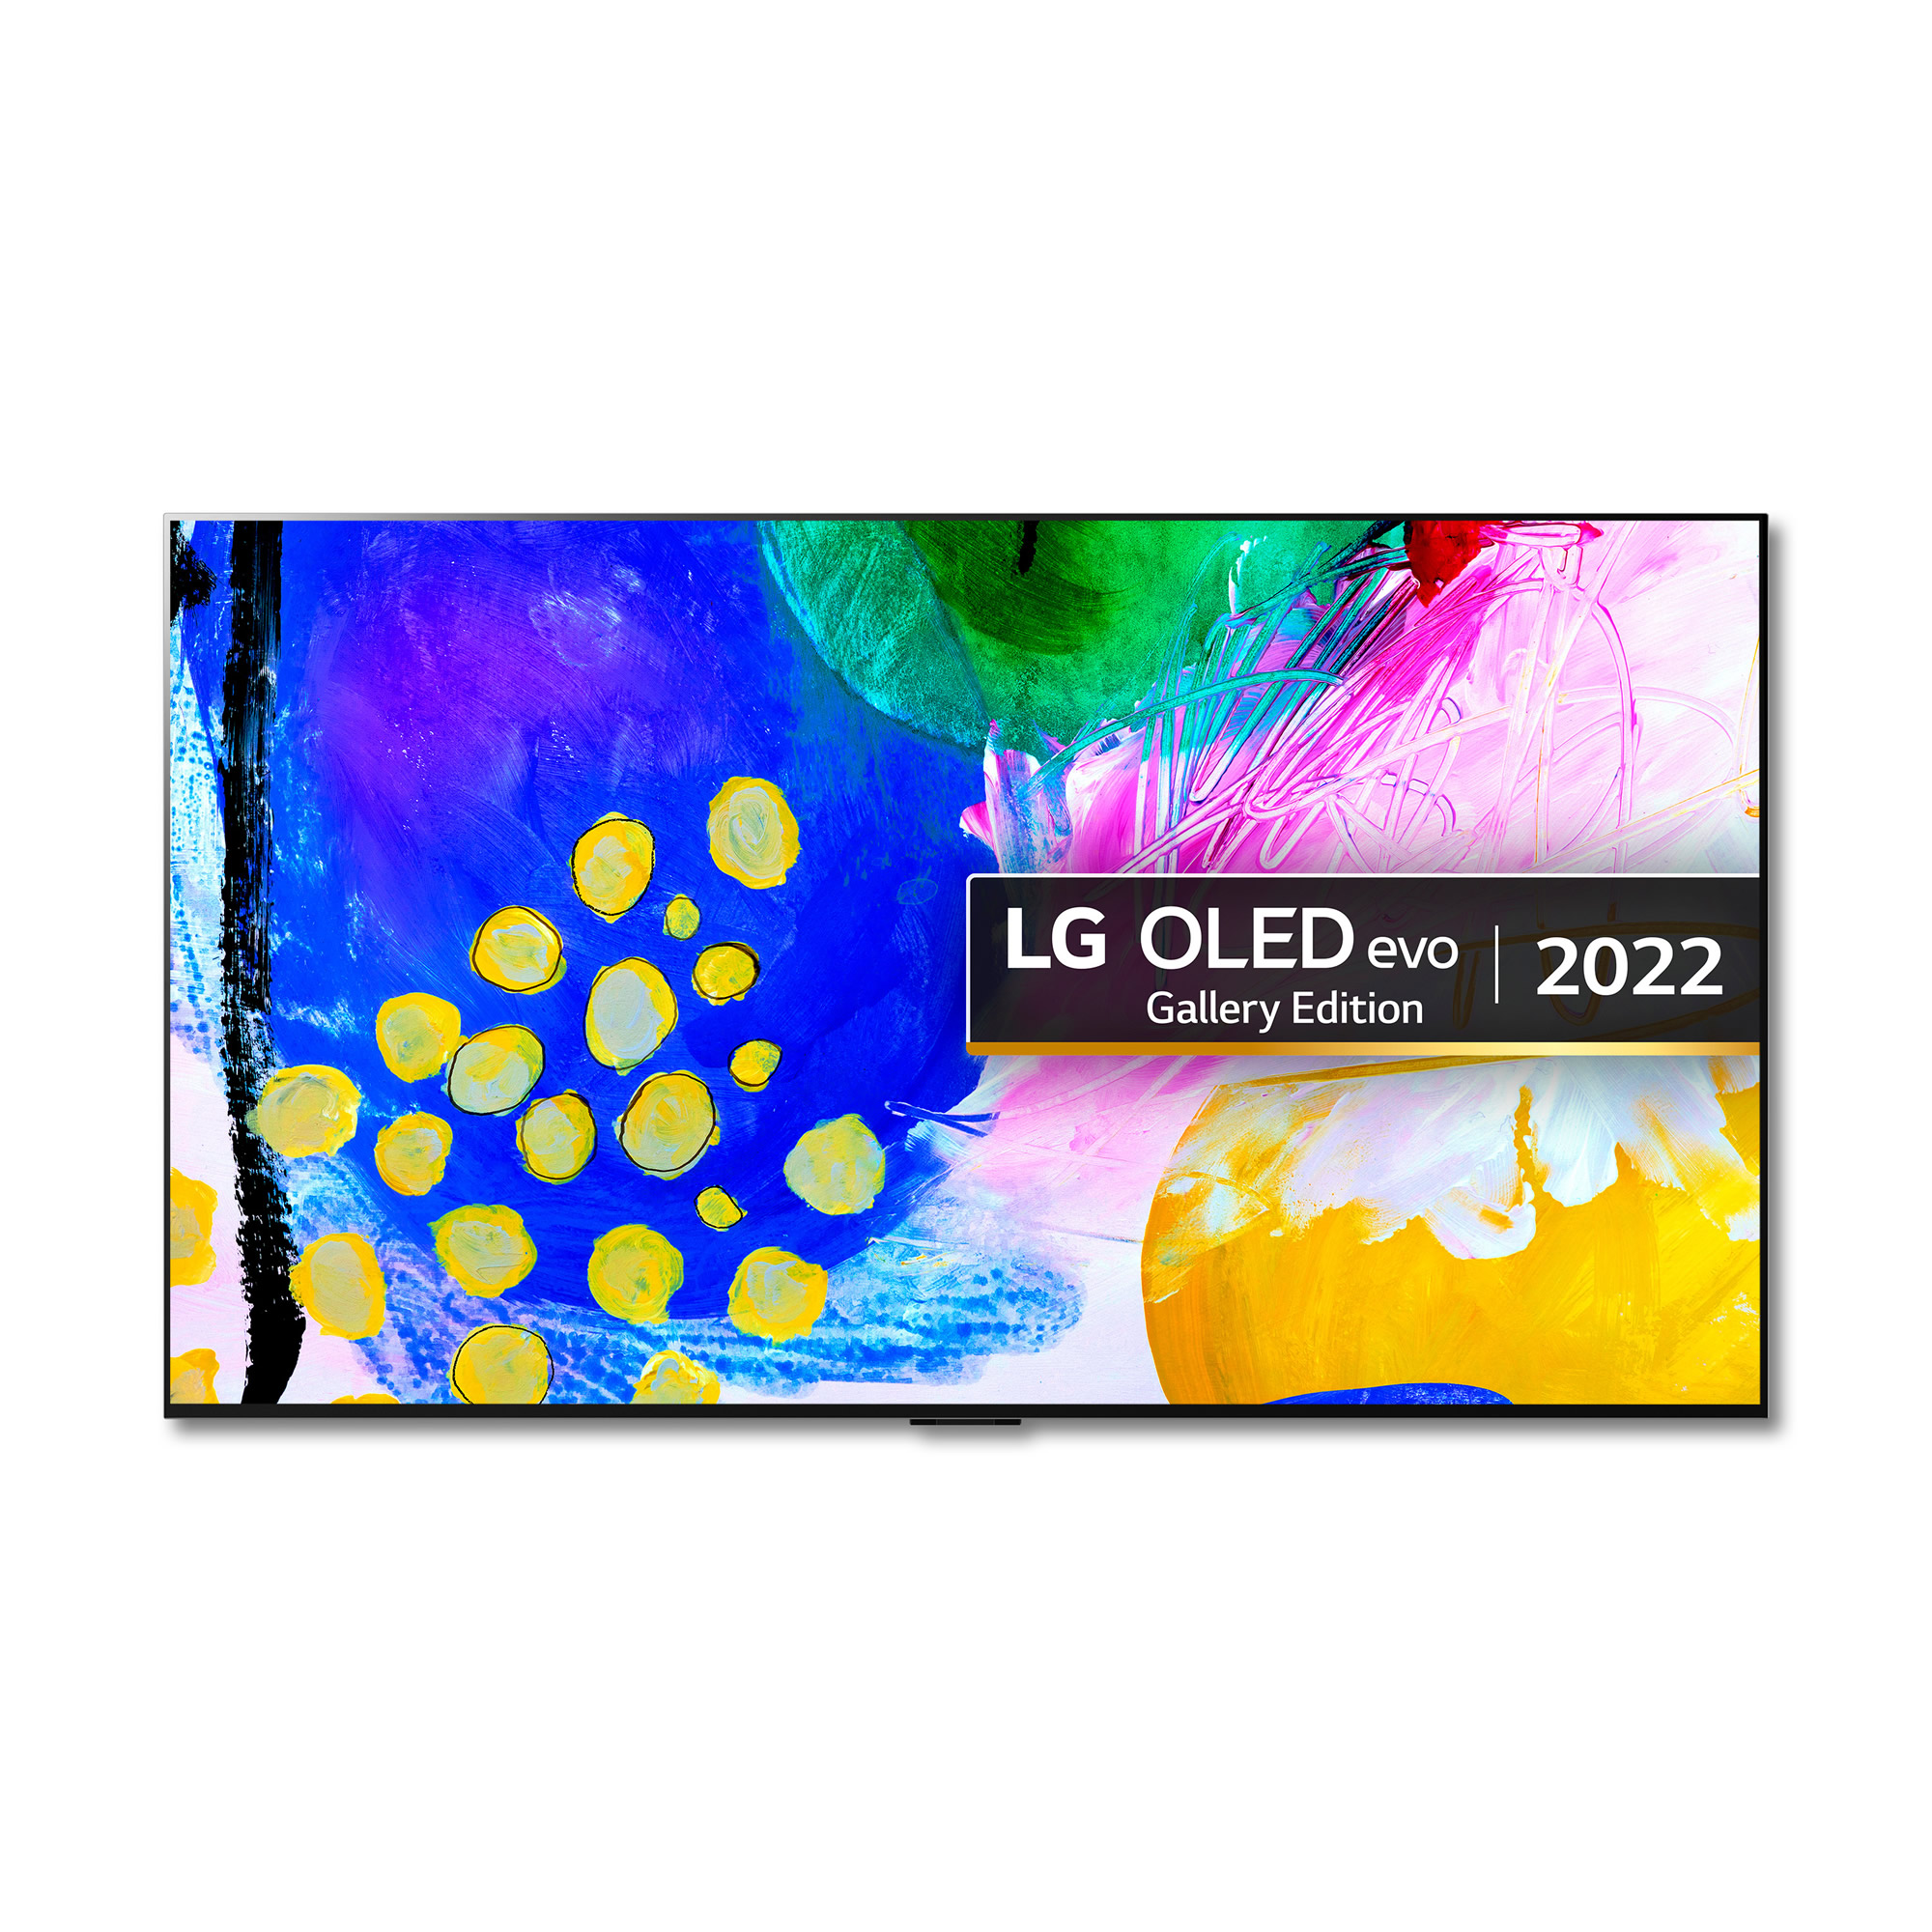 LG 65inch OLED HDR 4K UHD SMART TV WiFi Dolby Atmos